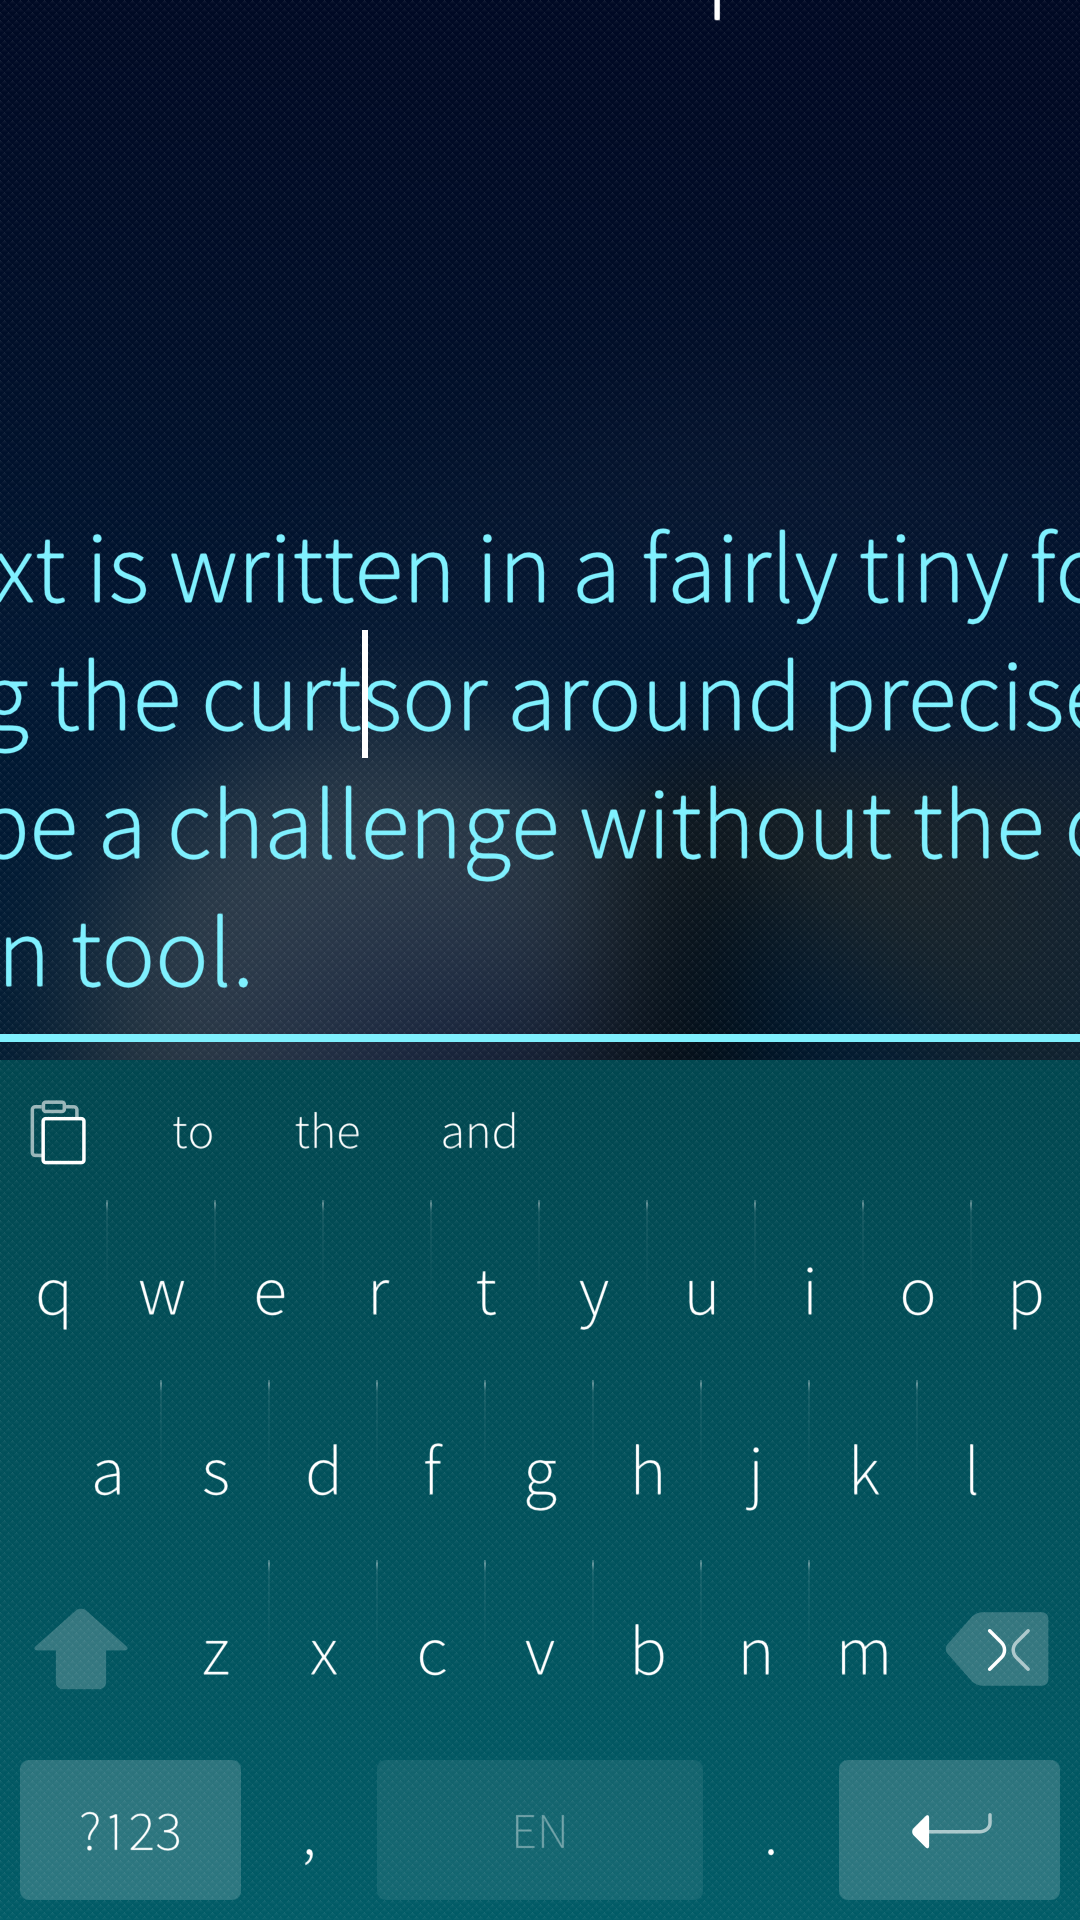 Text magnified. Cursor moved to typo.